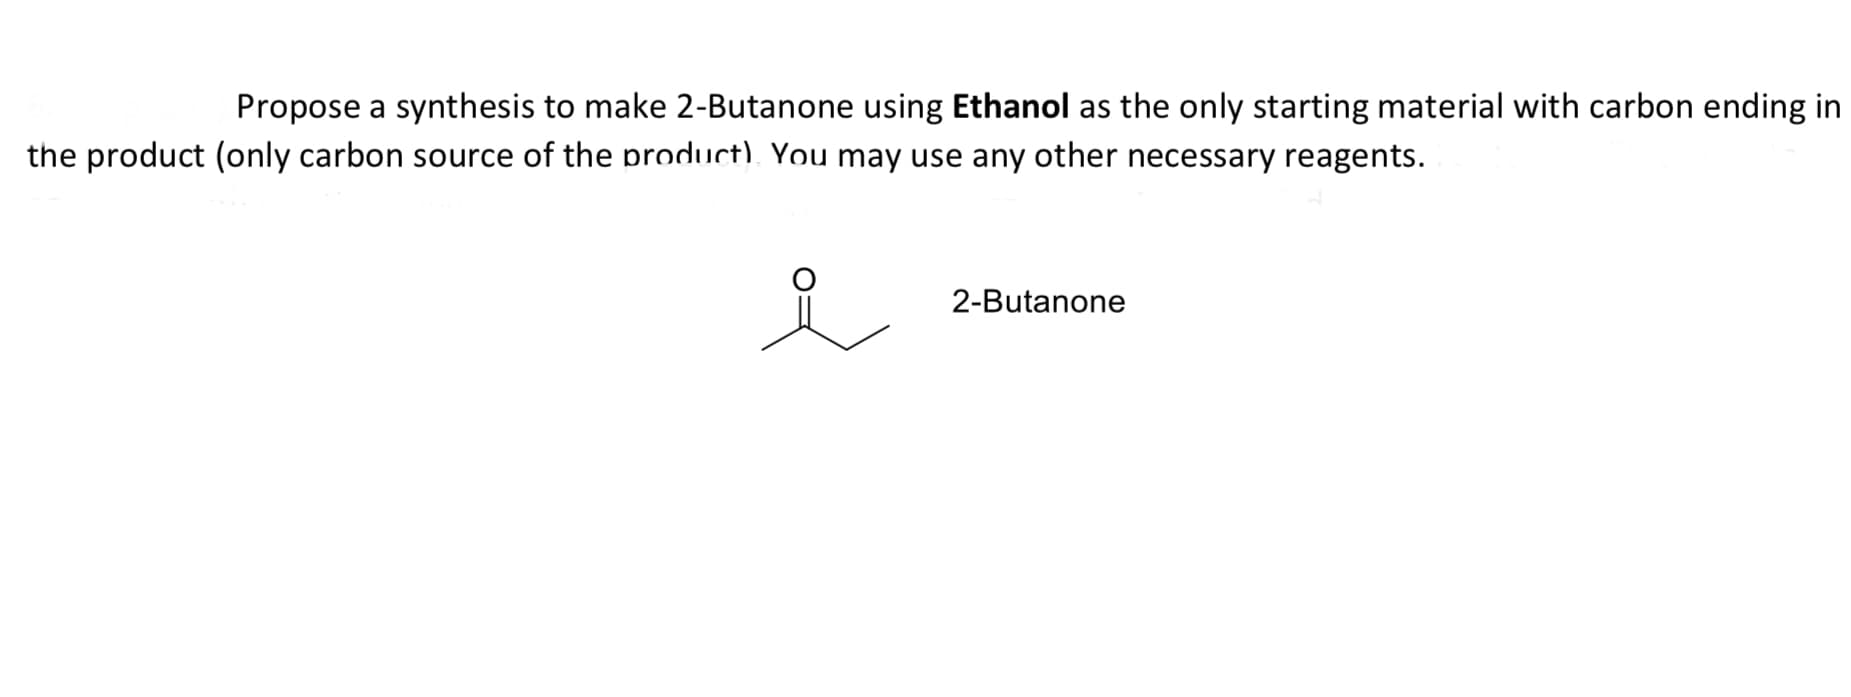 Propose a synthesis to make 2-Butanone using Ethanol as the only starting material with carbon ending in
e product (only carbon source of the product). You may use any other necessary reagents.
2-Butanone
